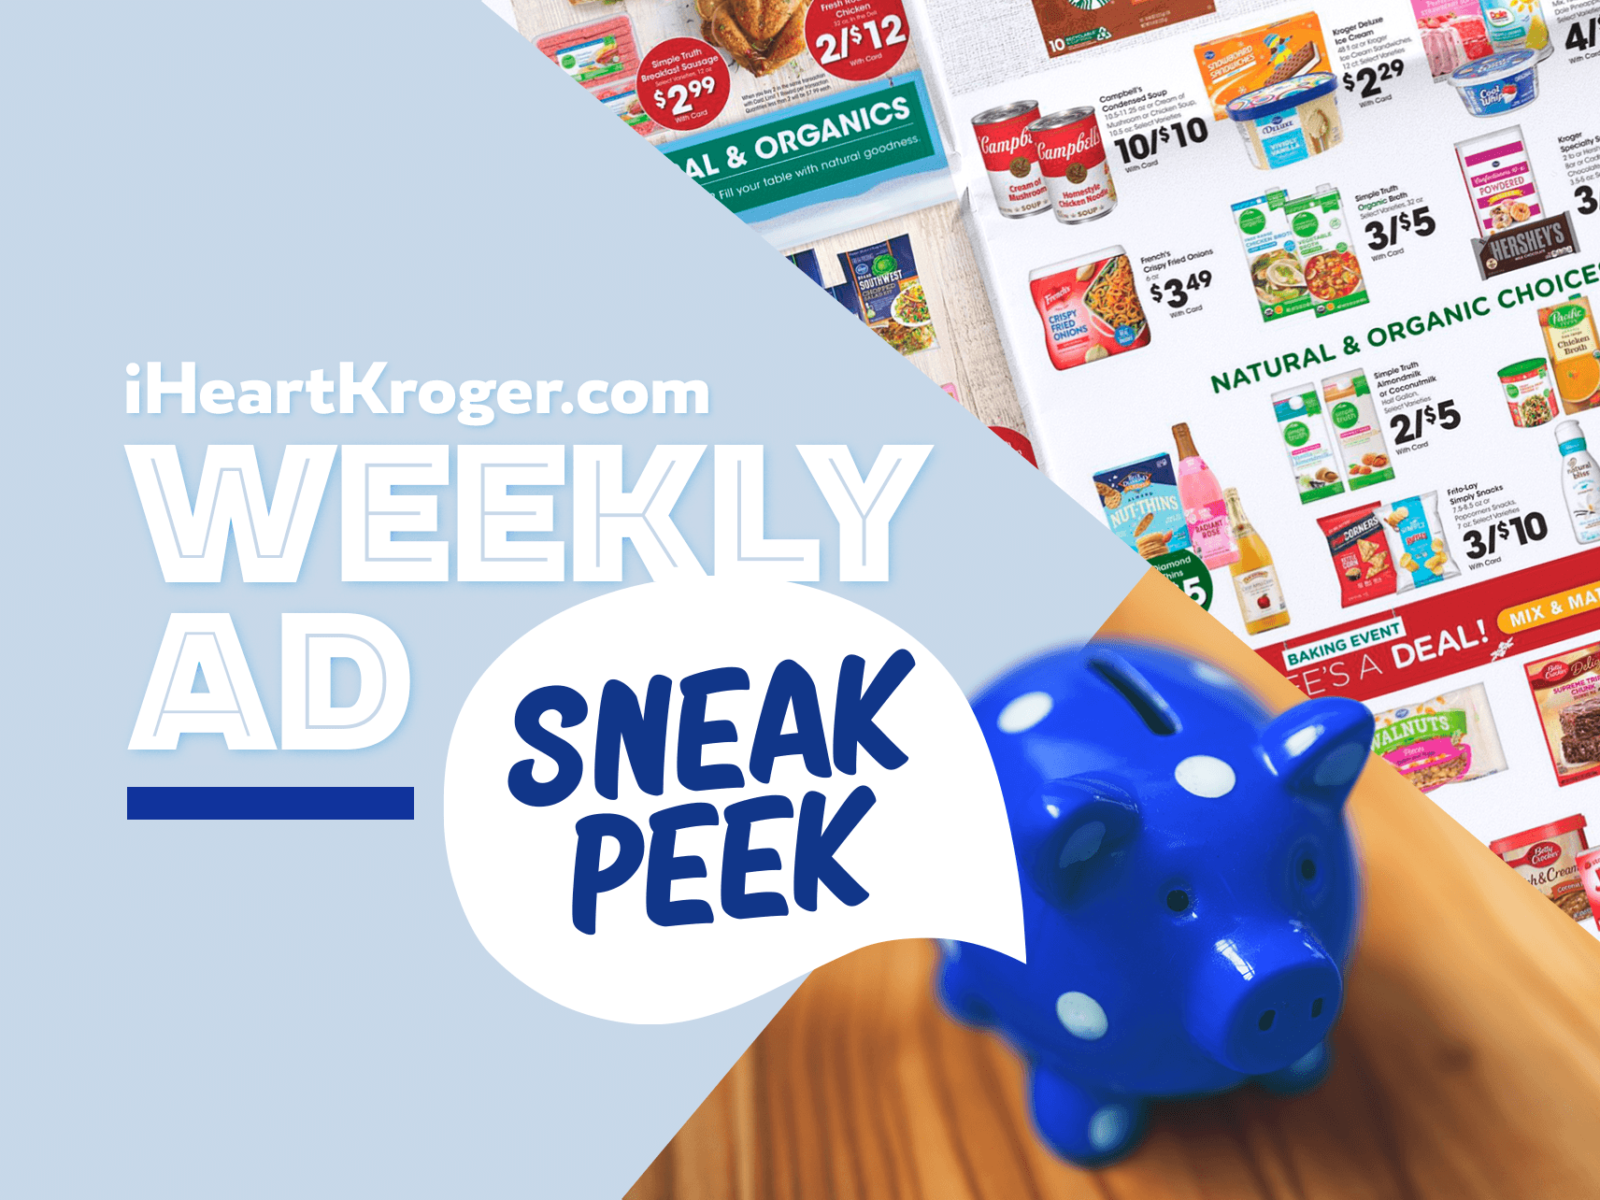 Kroger Ad & Coupons Week Of 11/9 to 11/15 – Mega Sale Continues